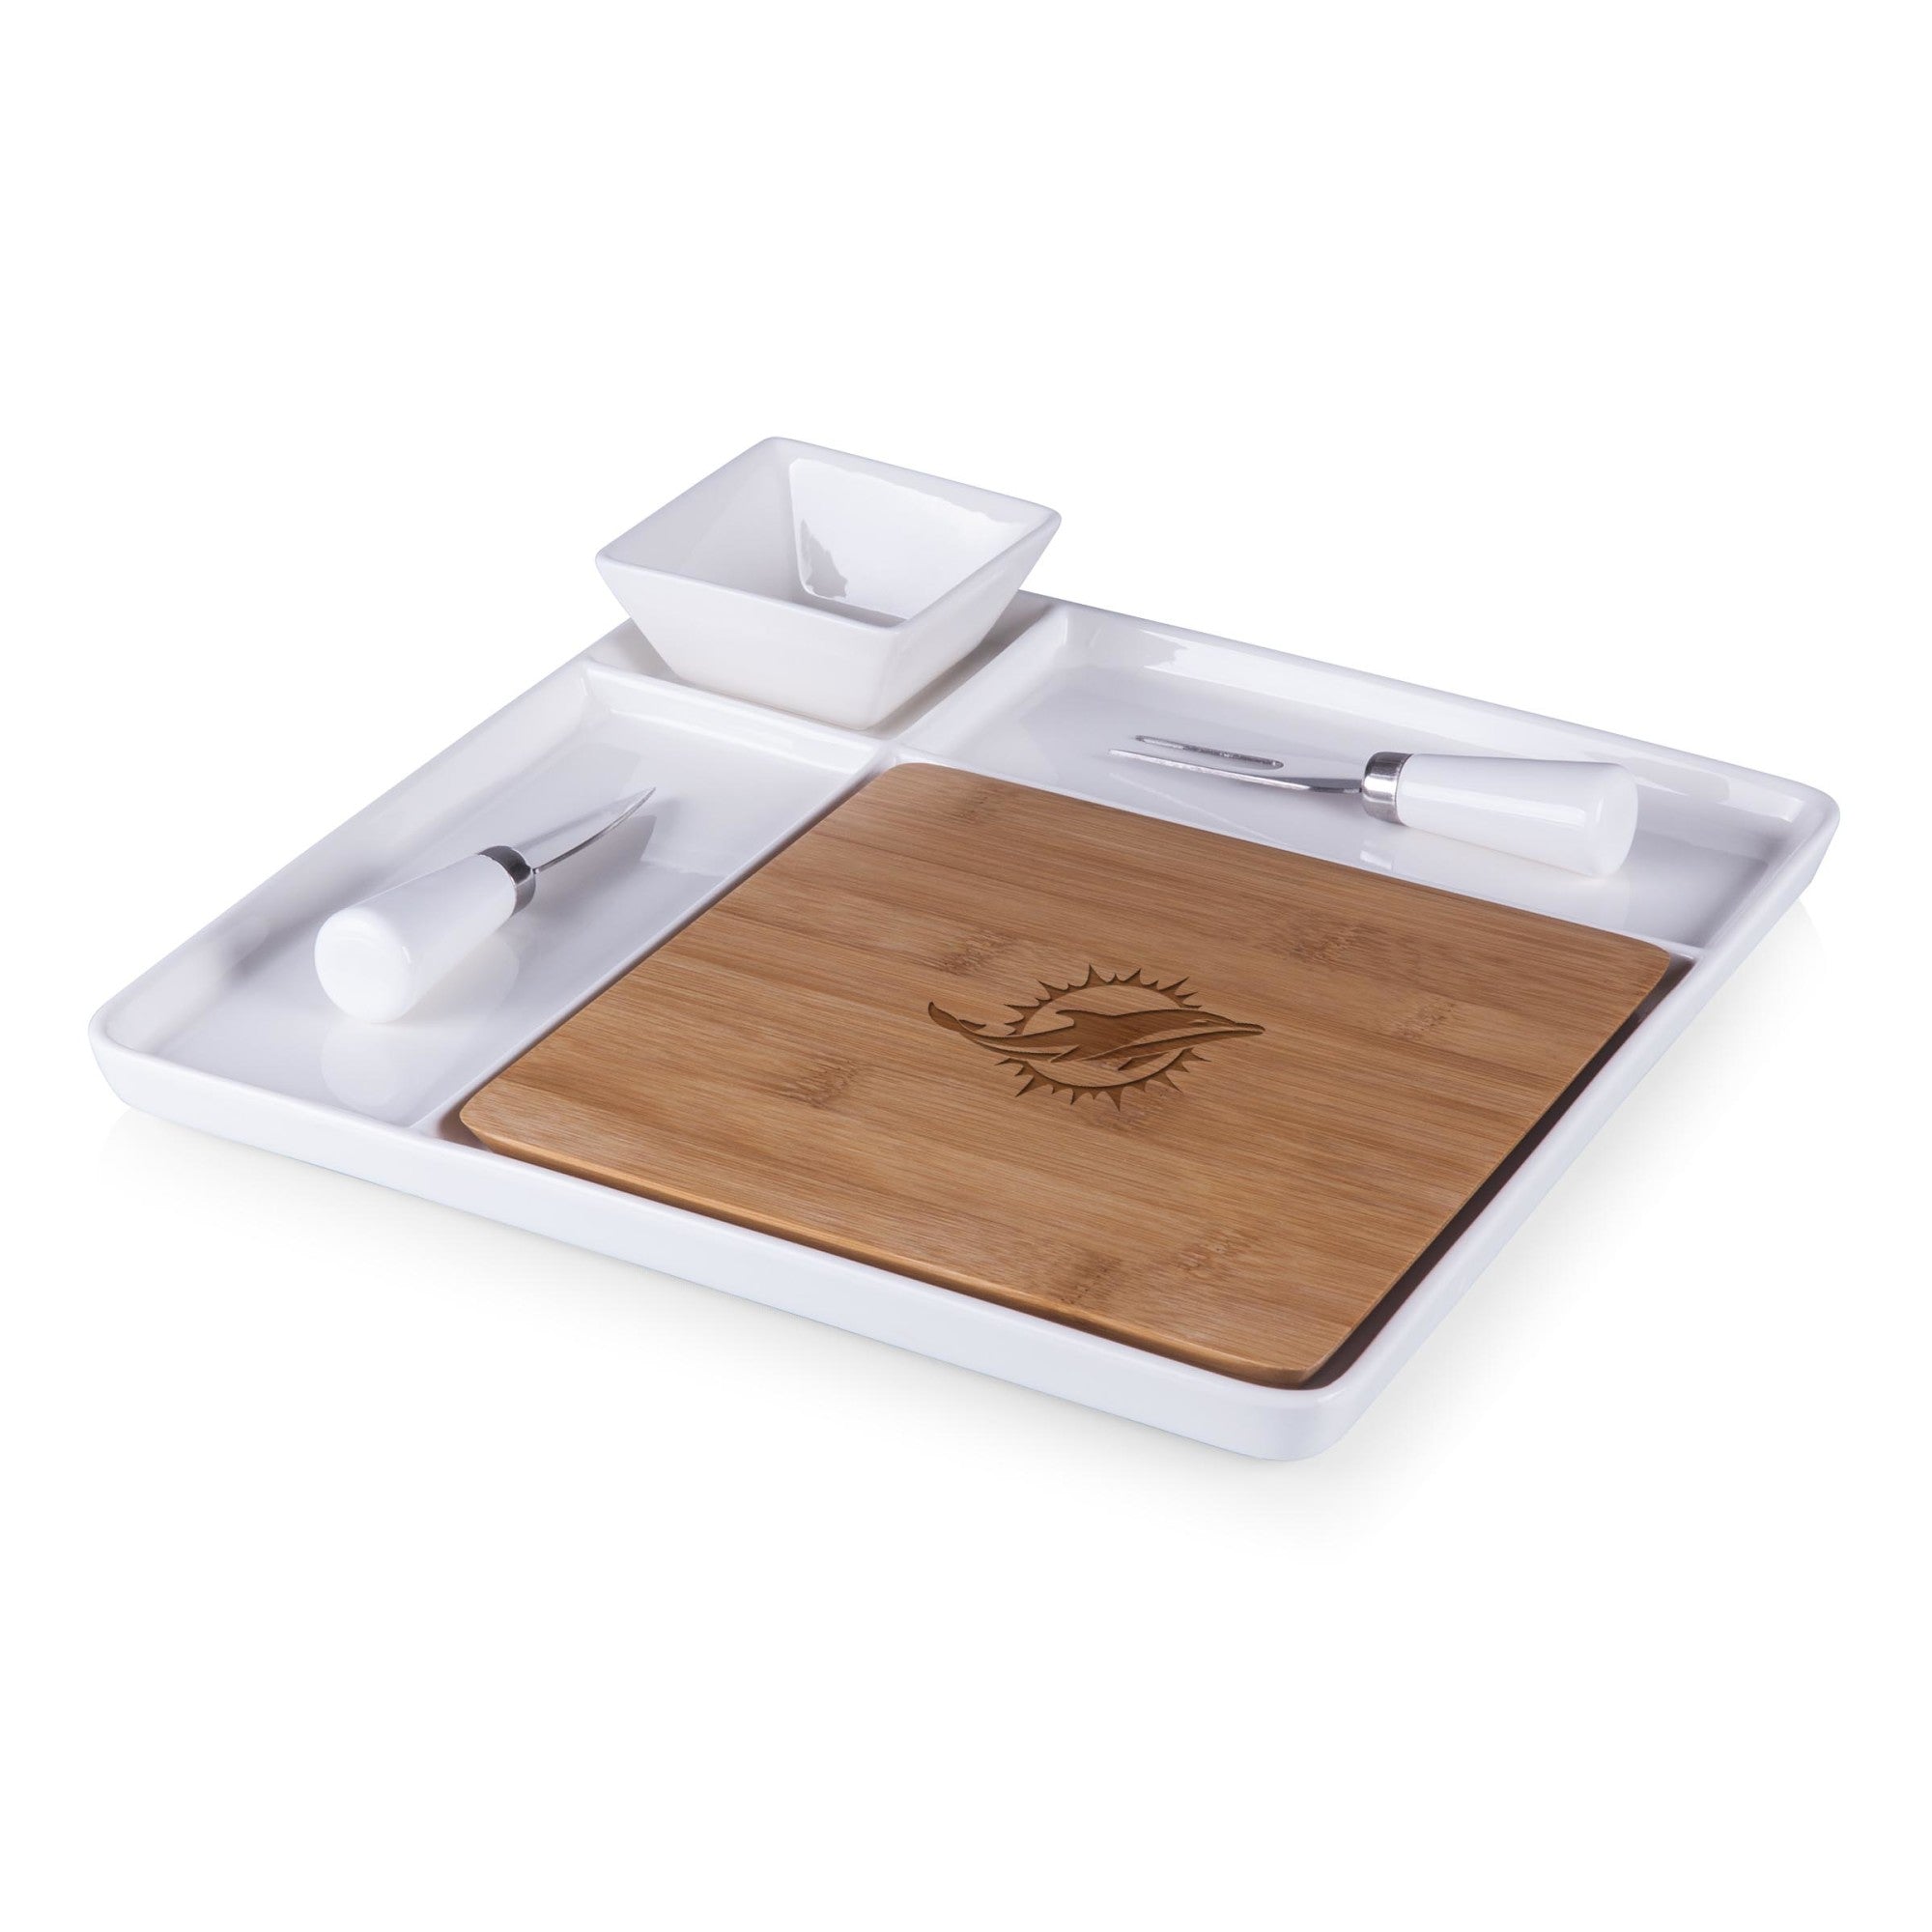 Miami Dolphins - Peninsula Cutting Board & Serving Tray